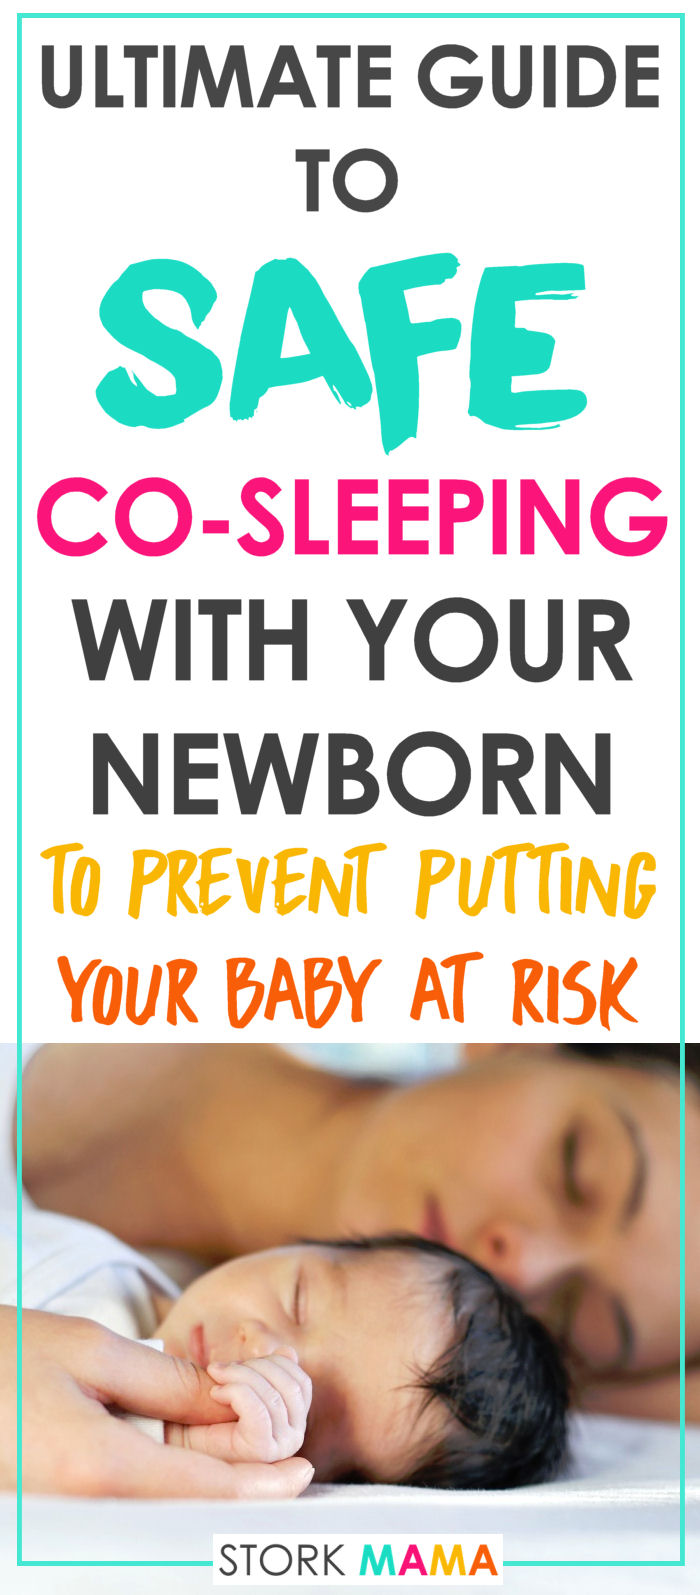 If you are considering co-sleeping with your newborn baby, the best way is to learn how to do it safely. A proper co-sleeping space for you and baby can help with feeding, baby's development and more sleep for parents. It's important to adapt your bed space to prevent the risk of suffocation, overheating or SIDS. Cosleeping with a Newborn Baby – Ultimate Sleep Guide | Stork Mama